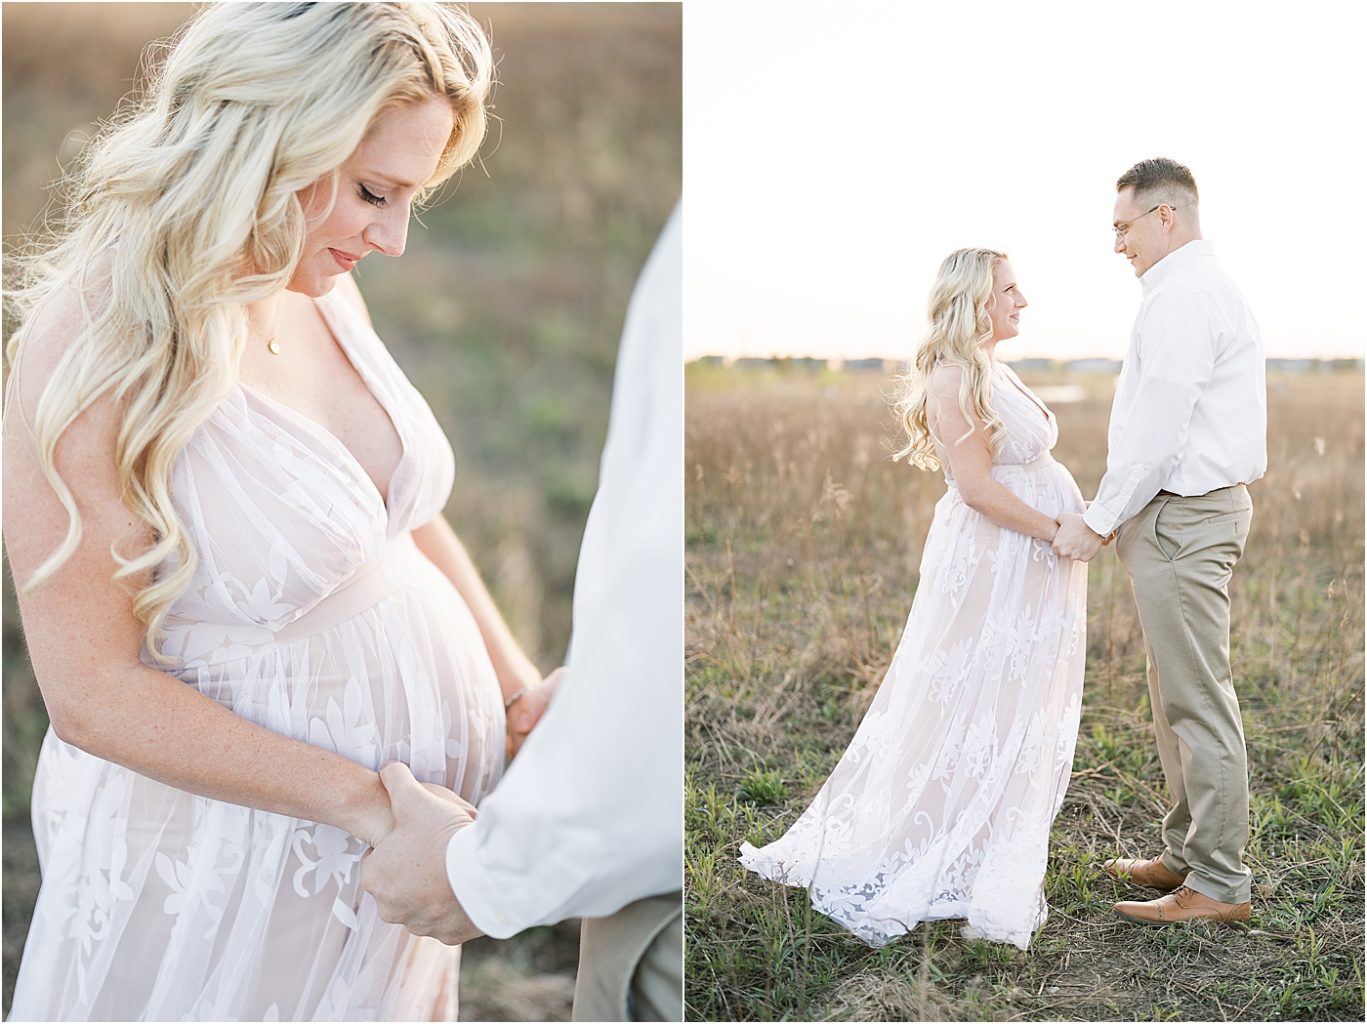 Sunset maternity photos for first-time parents in field in Fishers. Photos by Lindsay Konopa Photography.